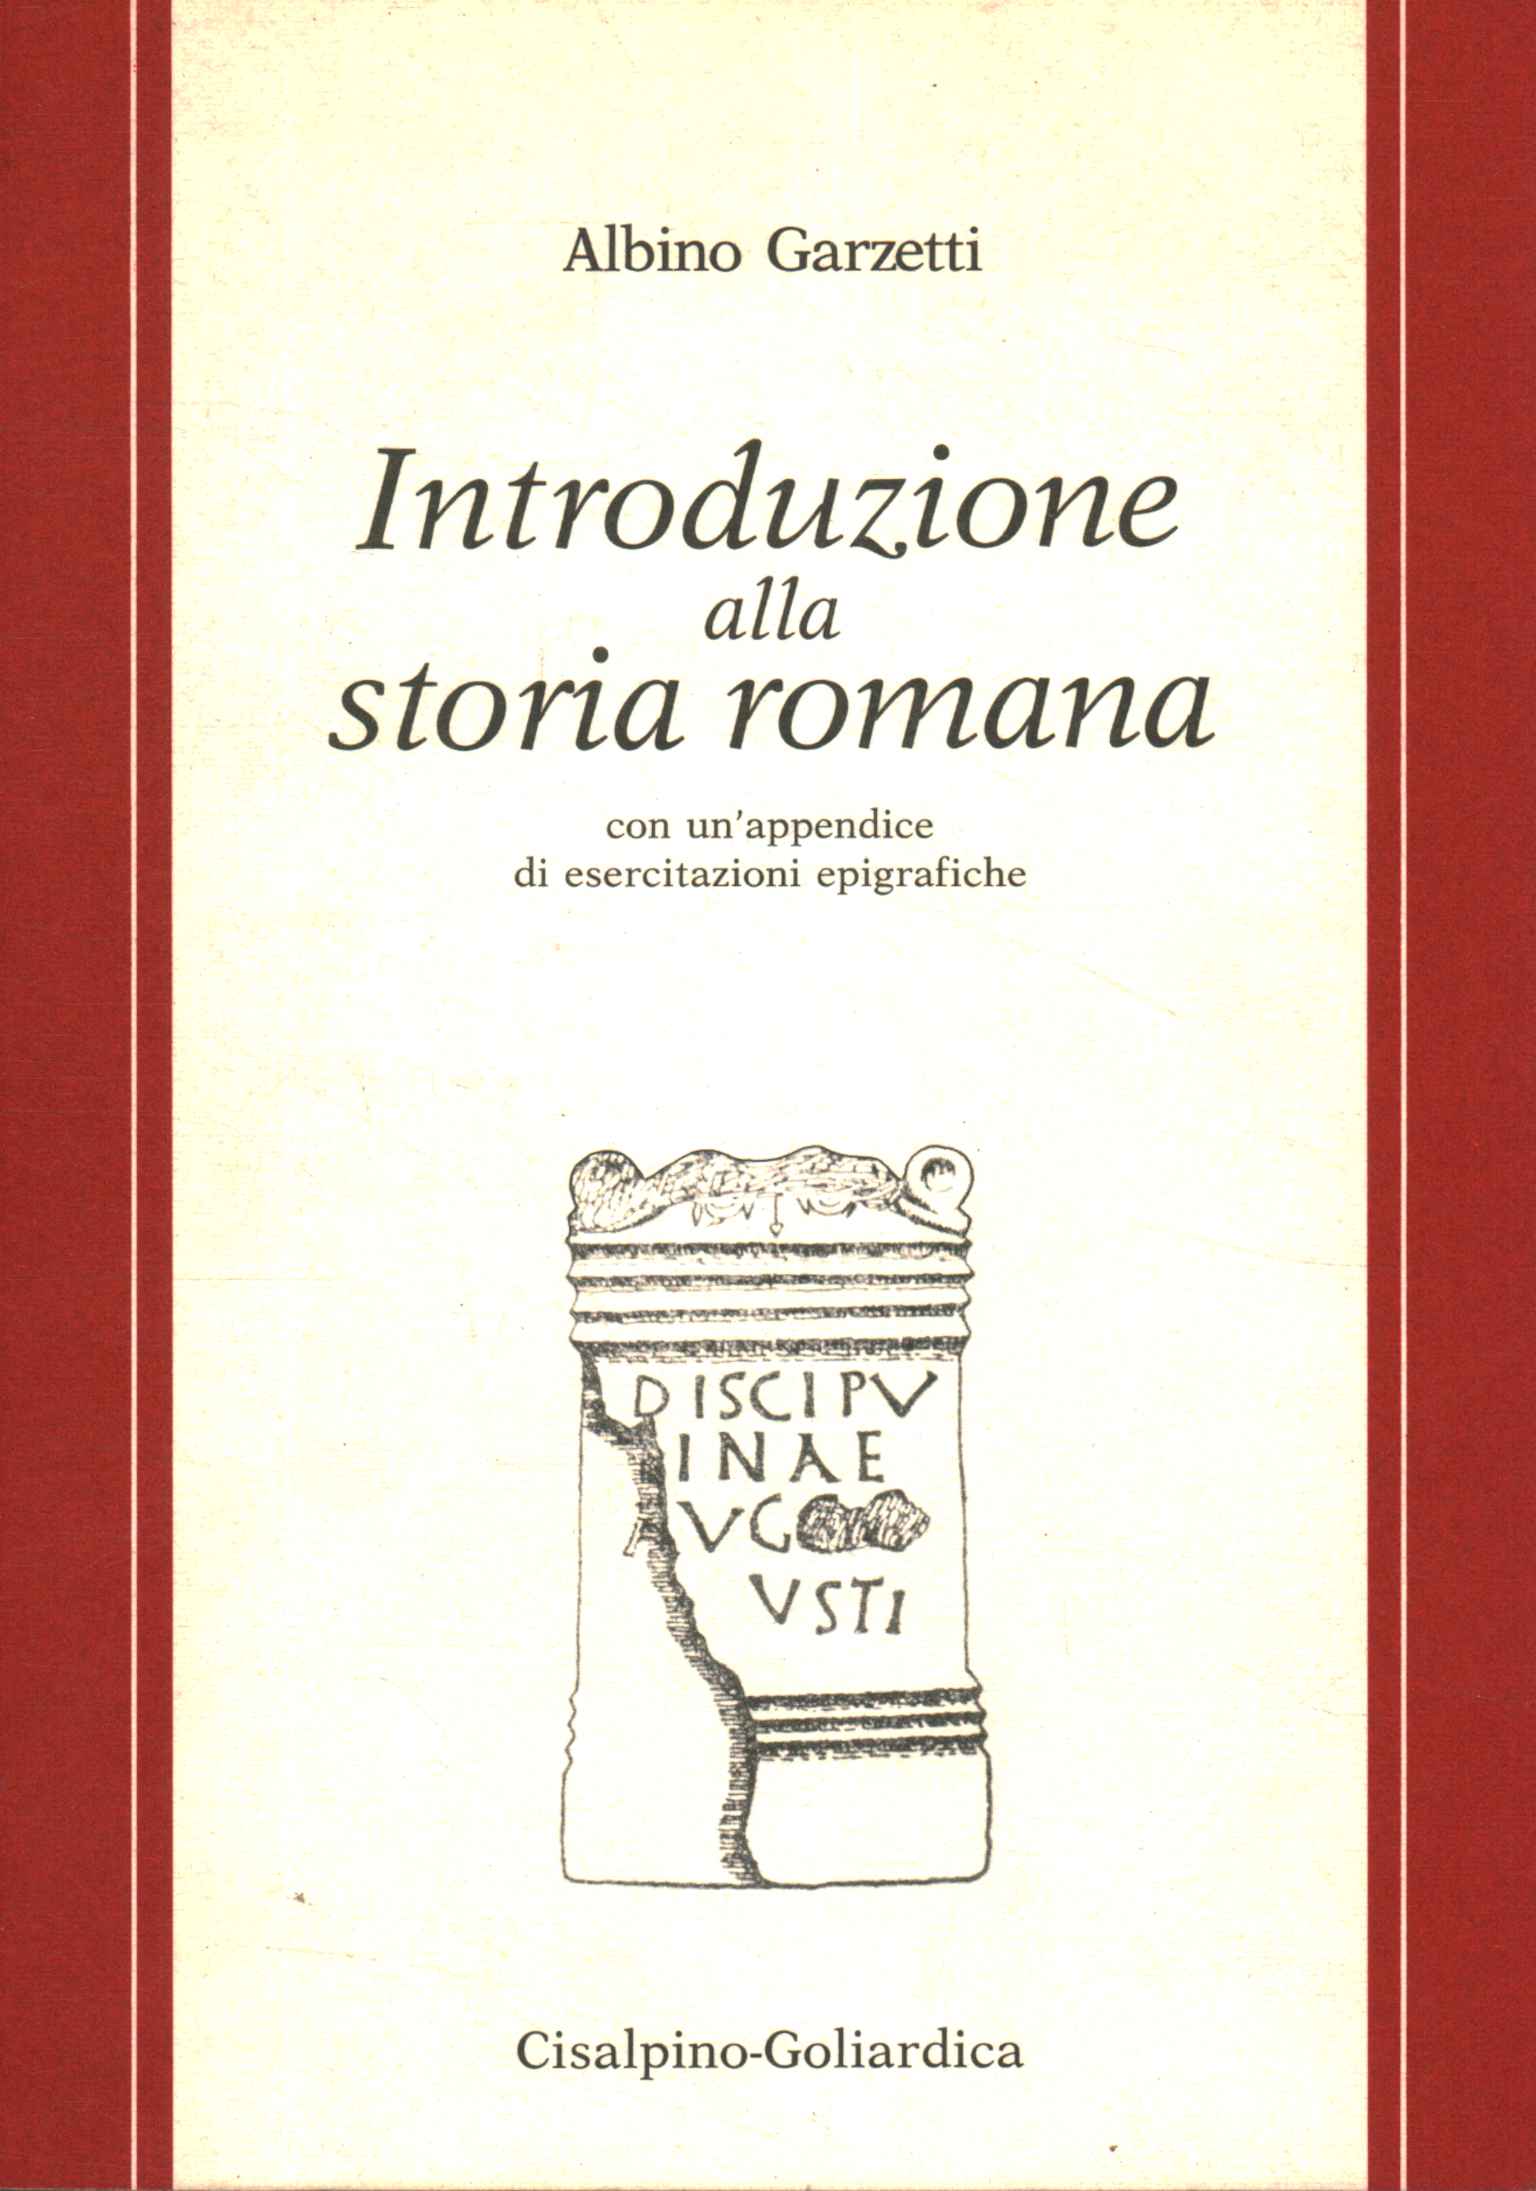 Introduction to Roman history